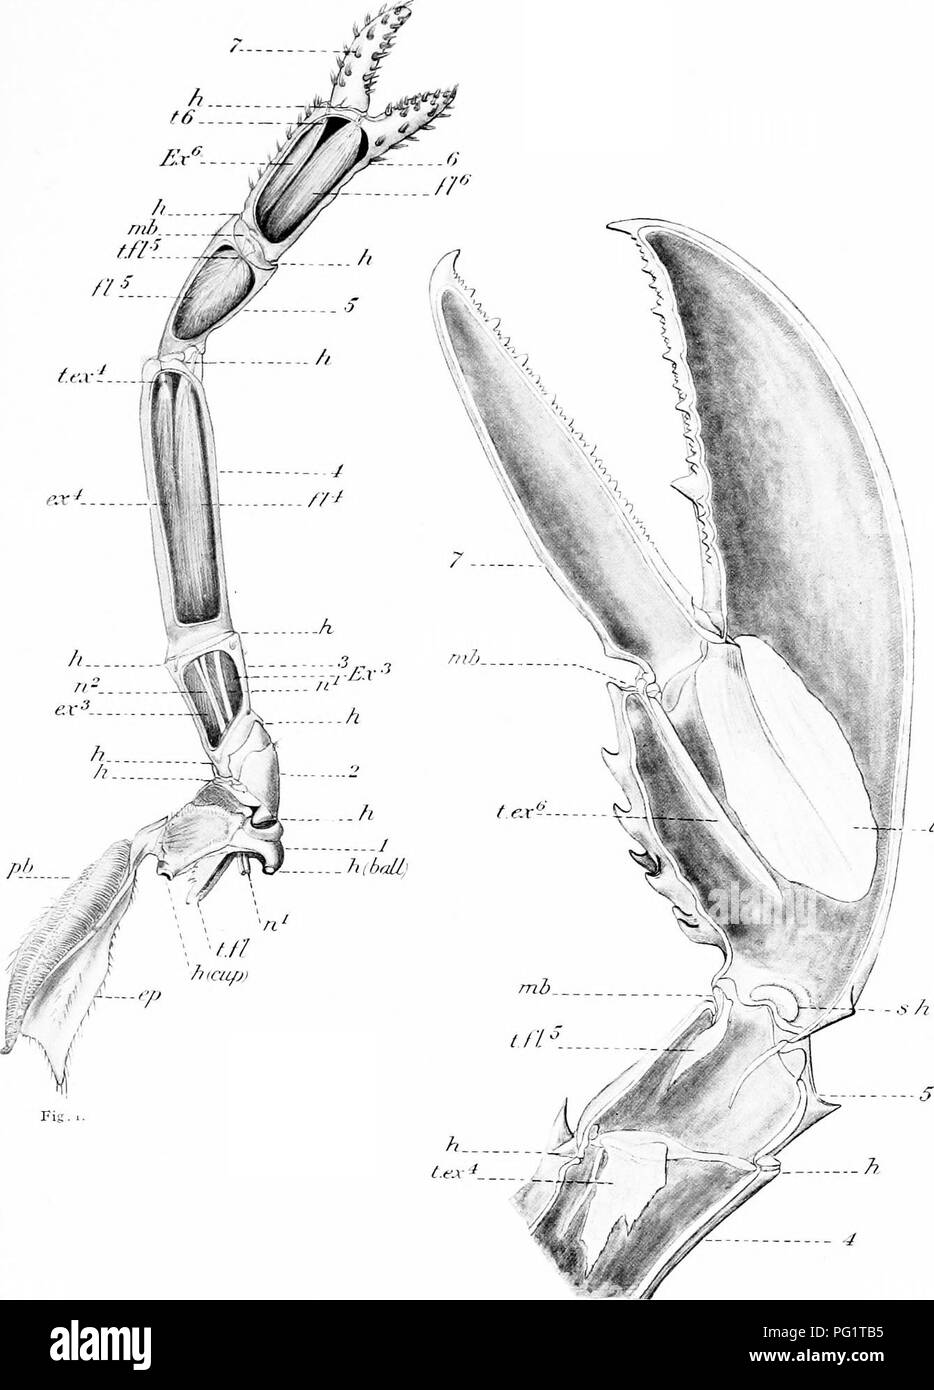 . Natural history of the American lobster... Decapoda (Crustacea); Lobster fisheries. Bui.1. U. S. B. F., 1909. Plate XLL. jm Fig. .. Fig. I.—Left second pereiopod from anterior or upper side, partly dissected to show the relations of muscles and tendons in the principal segments; hinges (A) and nerves (re^ and v?-) are indicated; and extensor and flexor m.uscles {ex, ft.) are numbered to correspond to segments of origin. Fig. 2.—SheU of right toothed forceps in sectional view from above, to show tendons crossing distal joints, s h, lower sliding hinge, from inside; mb, interarticular membrane Stock Photo